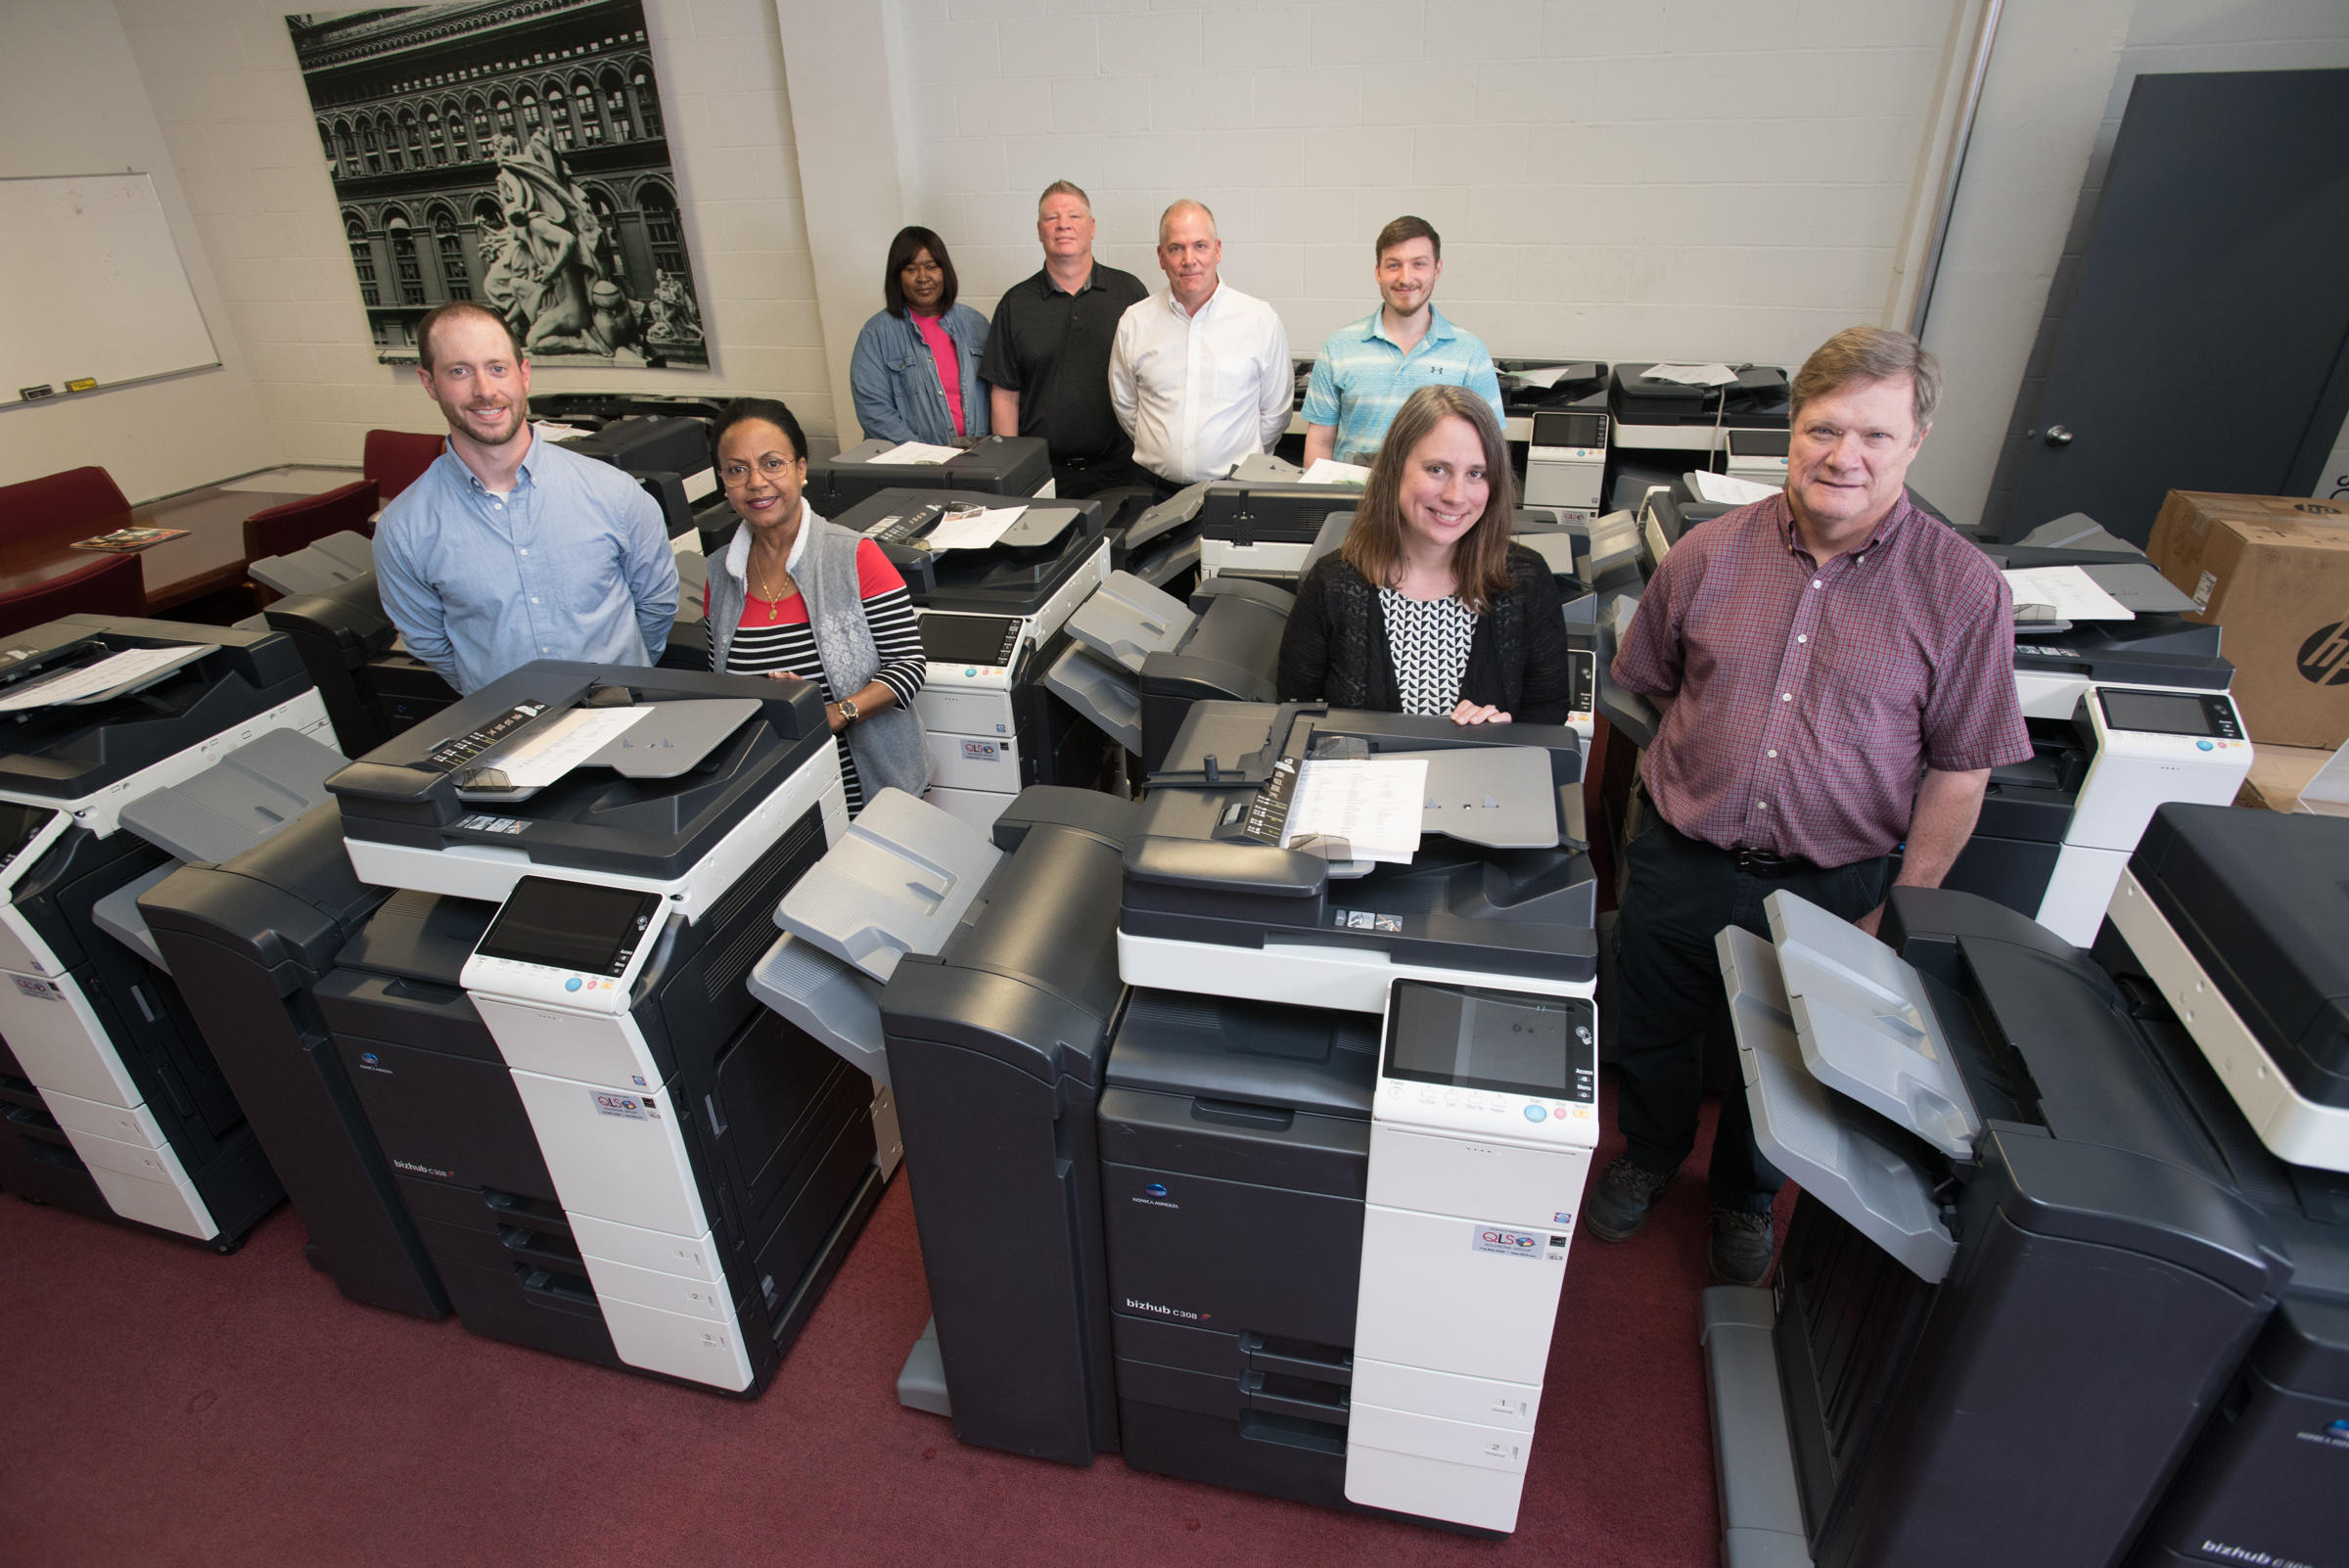 GET TO KNOW US WE ARE AN INDUSTRY LEADER IN THE DOCUMENT PRINTING & IMAGING INDUSTRY.